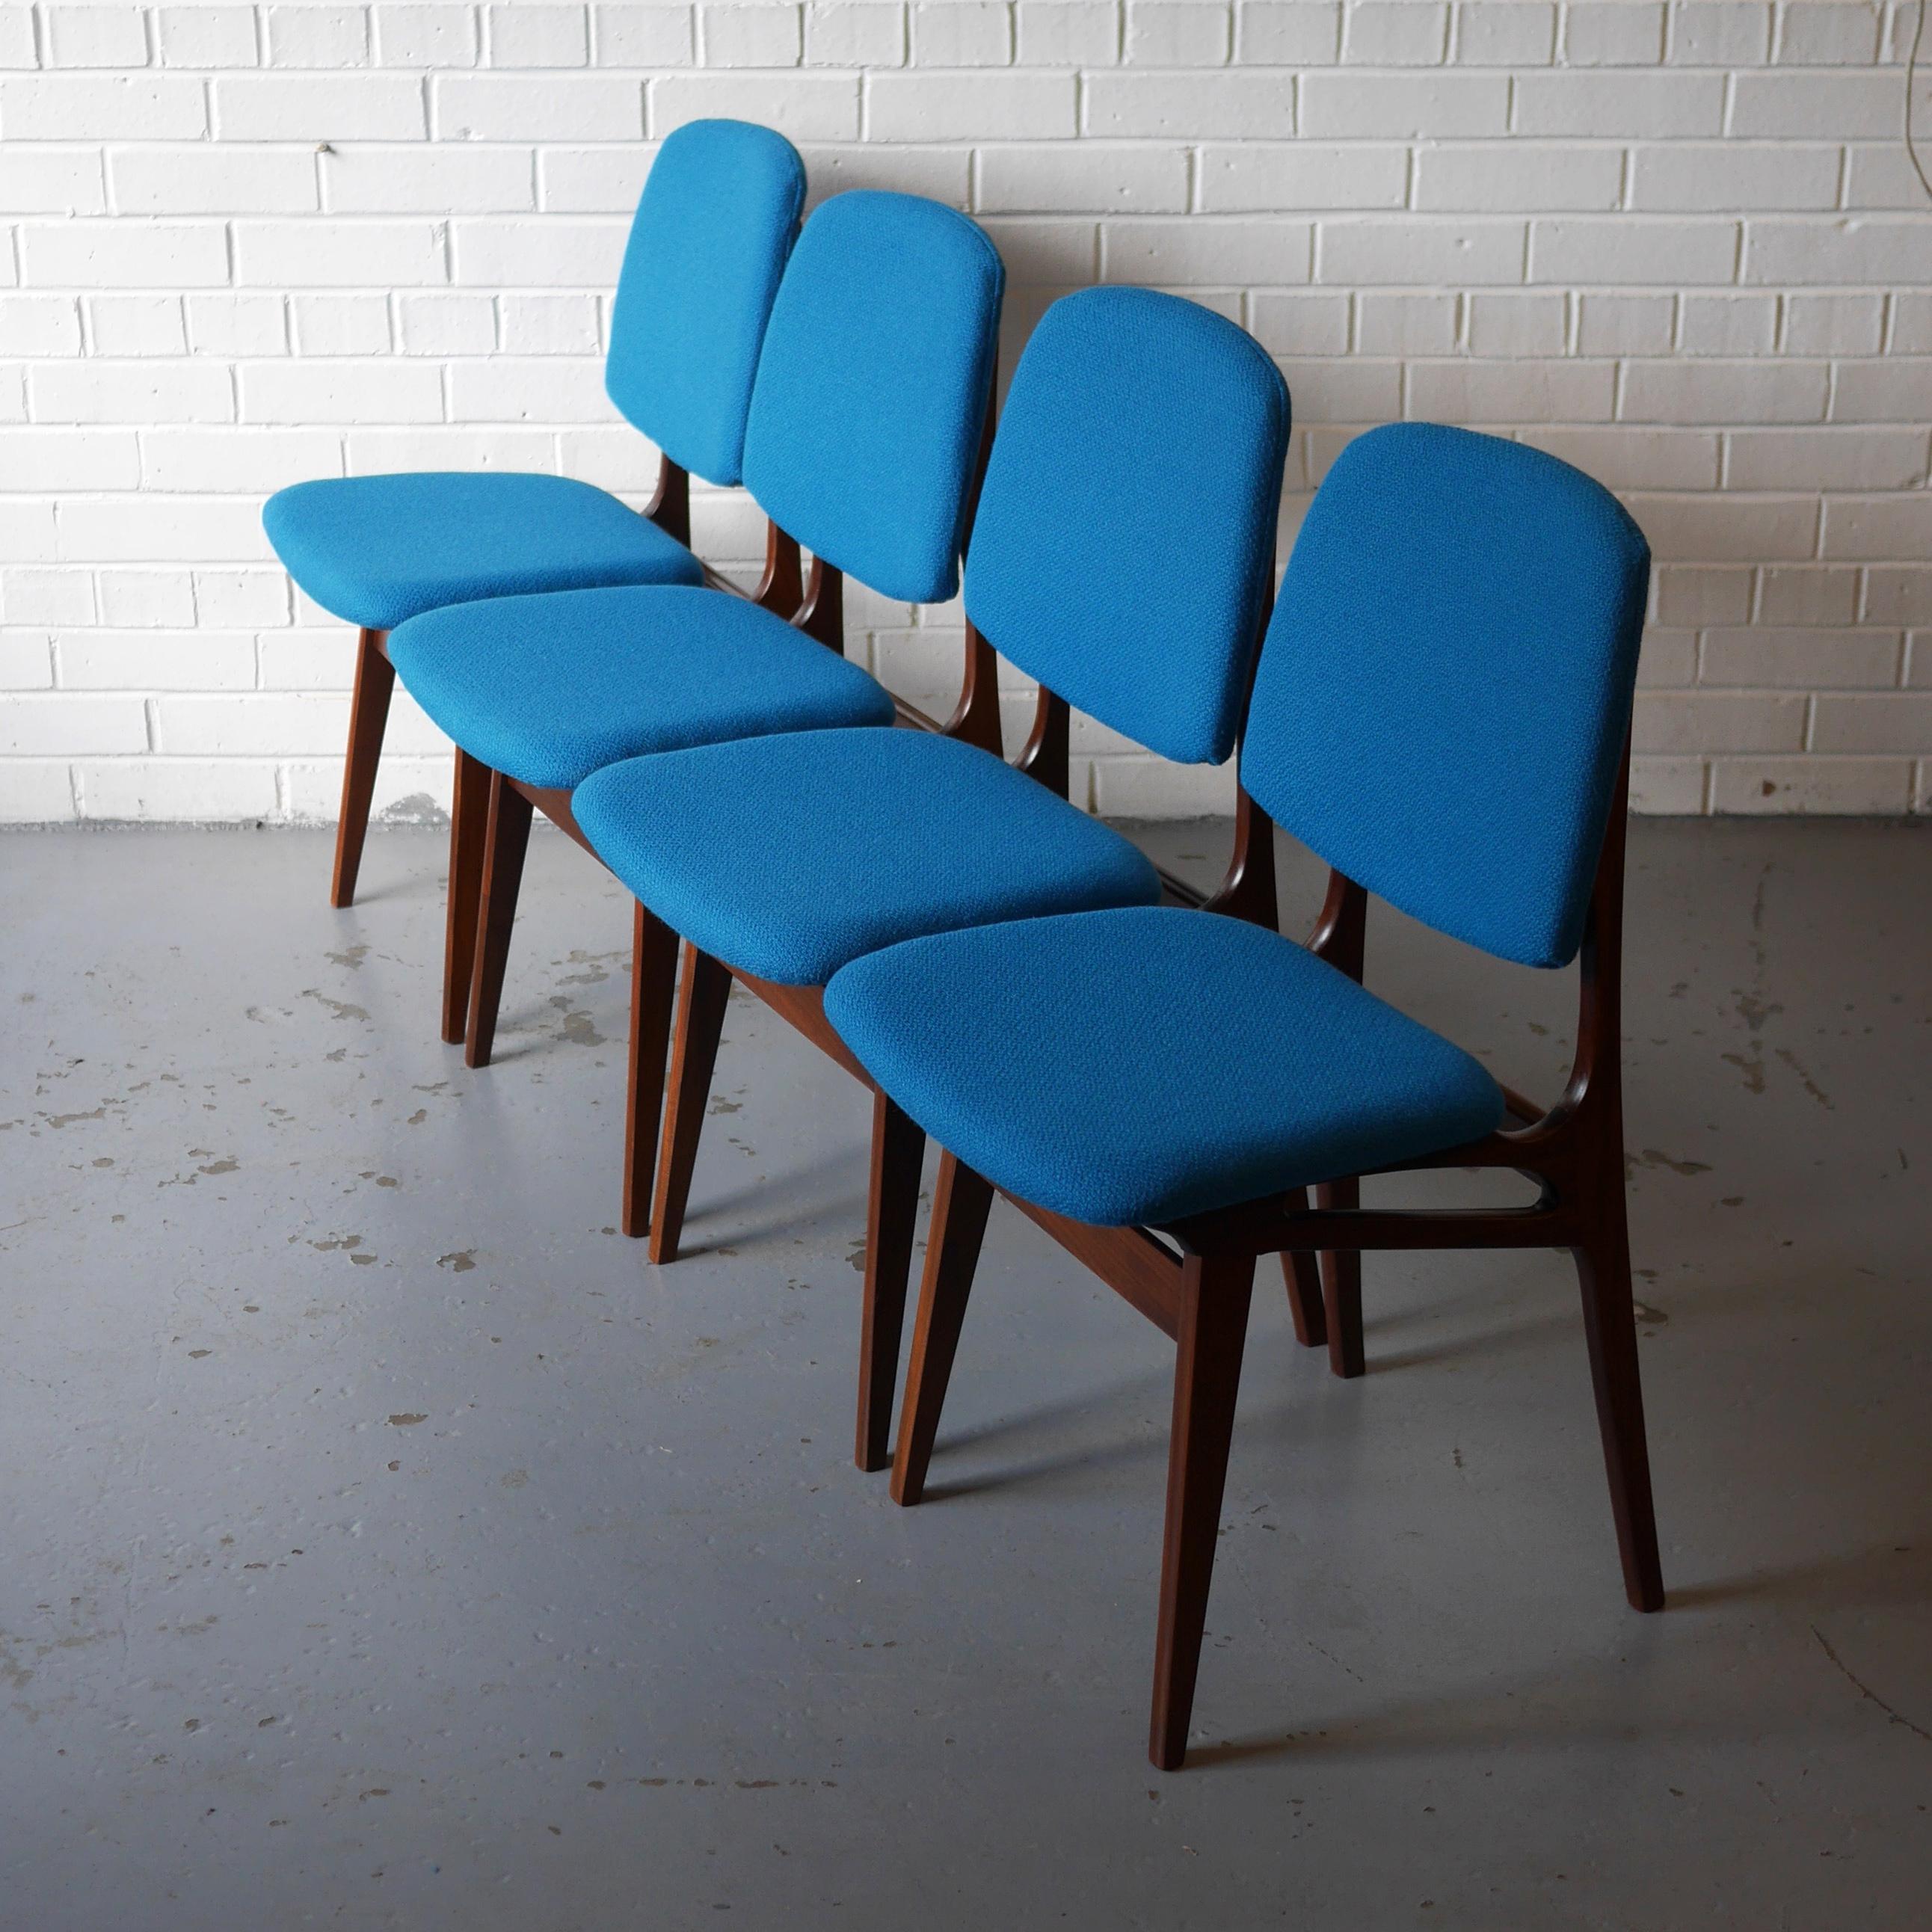 Norwegian Set of Four Solid Afrormosia Dining Chairs with Blue Wool Upholstery, circa 1961 For Sale